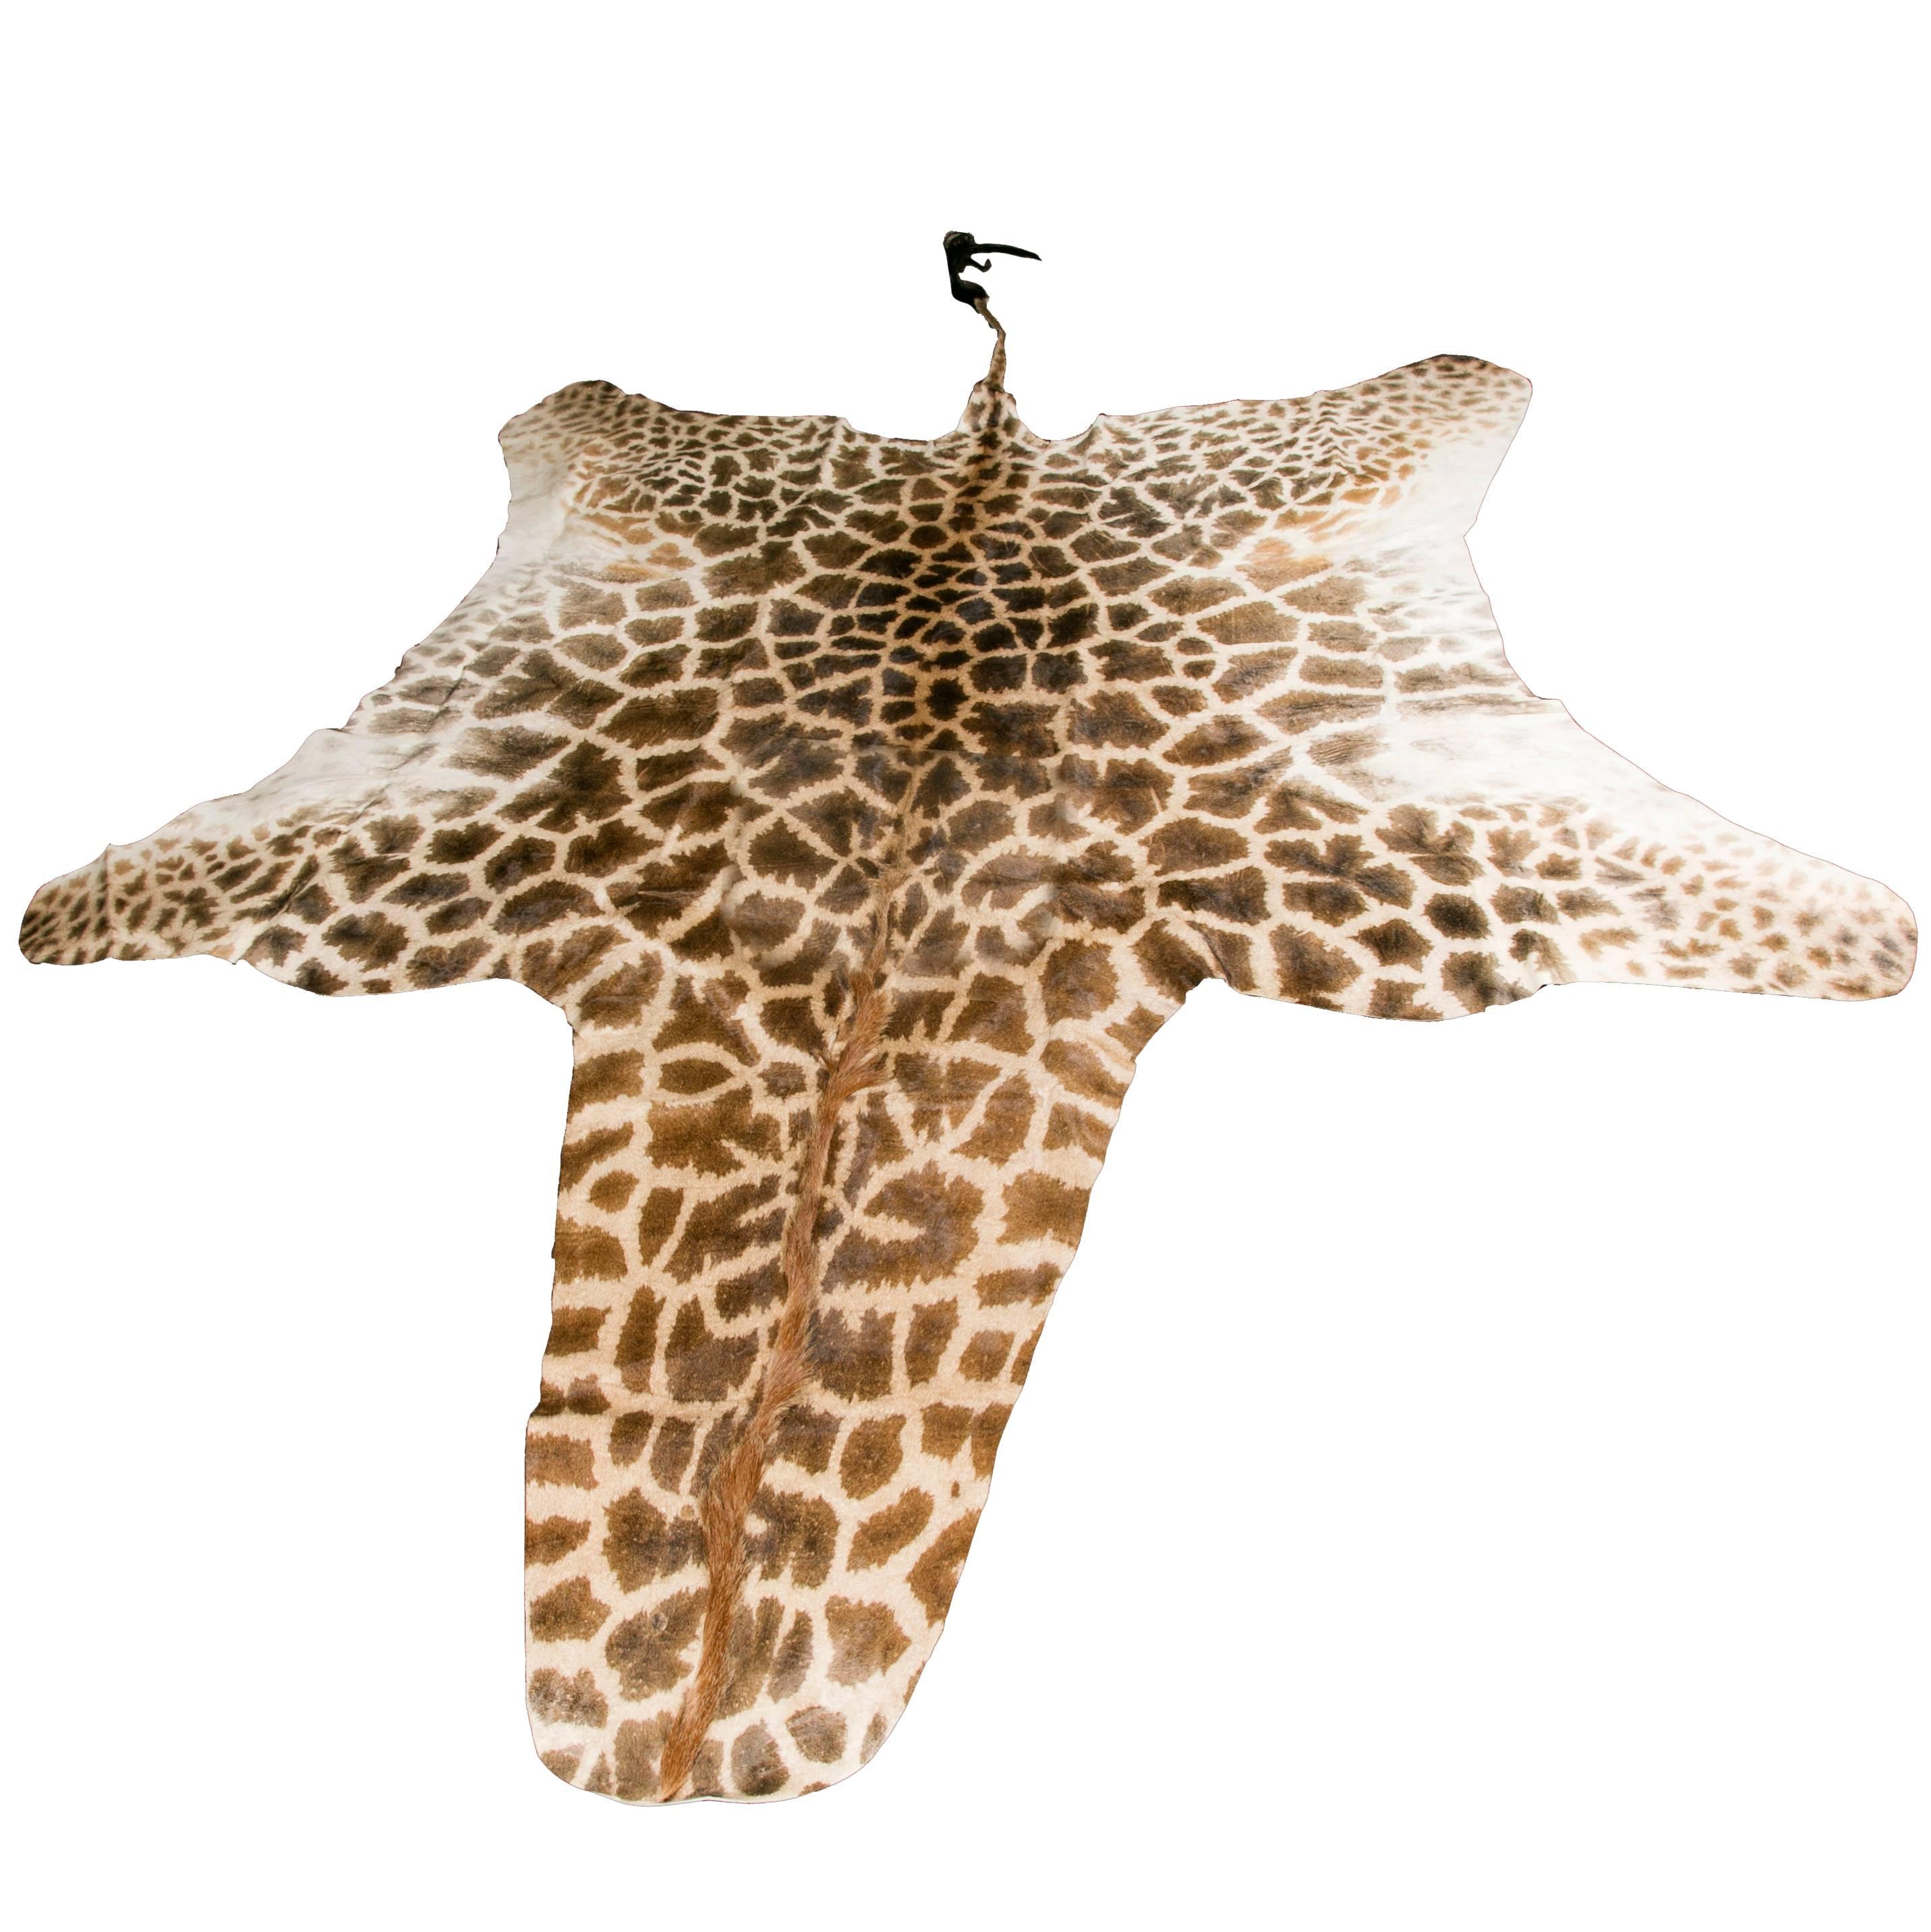 Authentic and Beautiful African Giraffe Skin Rug For Sale